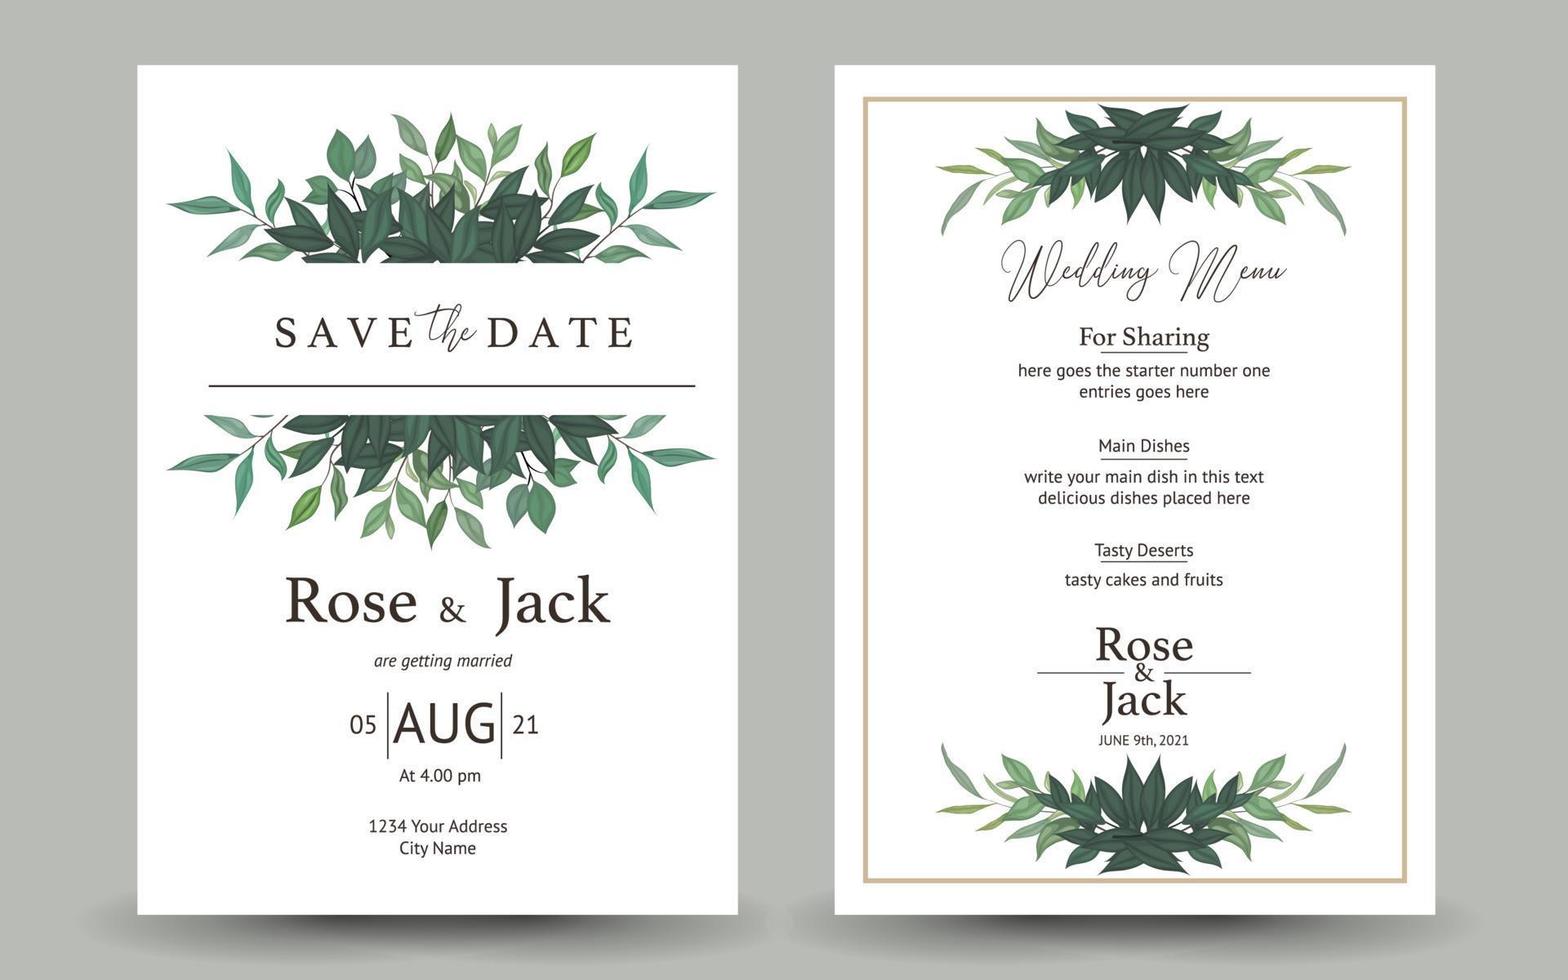 sets of wedding invitation design. beautiful floral and flowers bouquet. vector